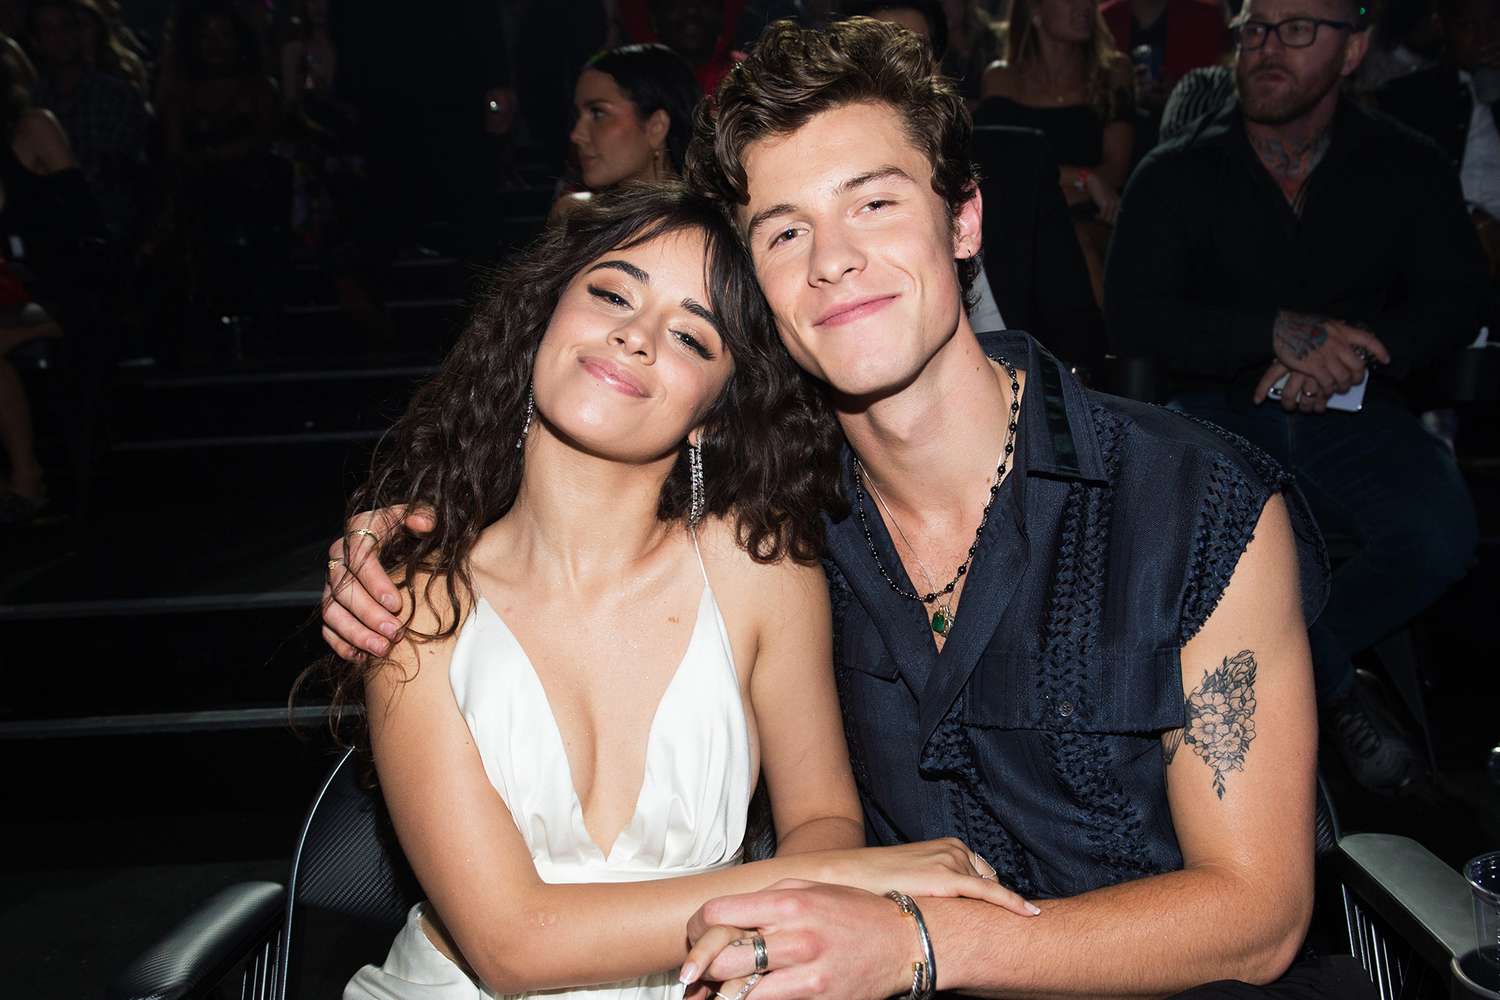 shawn-mendes-steps-out-with-mystery-woman-following-split-from-camila-cabello